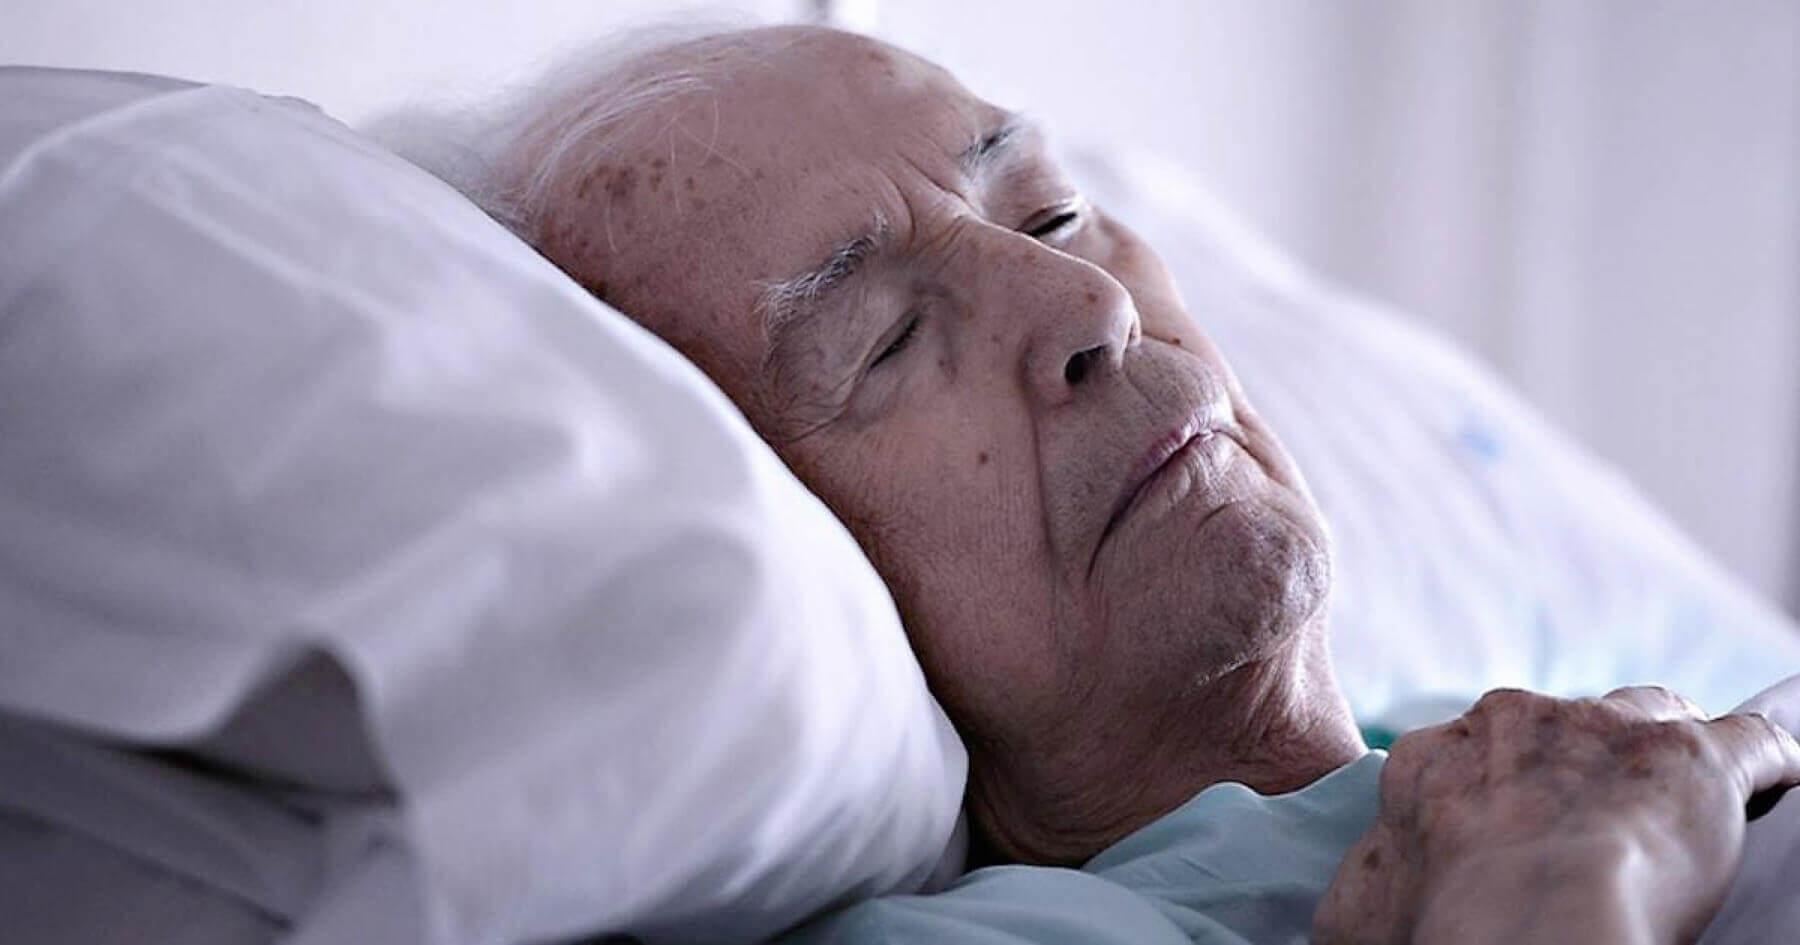 Blanket do not resuscitate orders imposed on English care homes, according to CQC-web